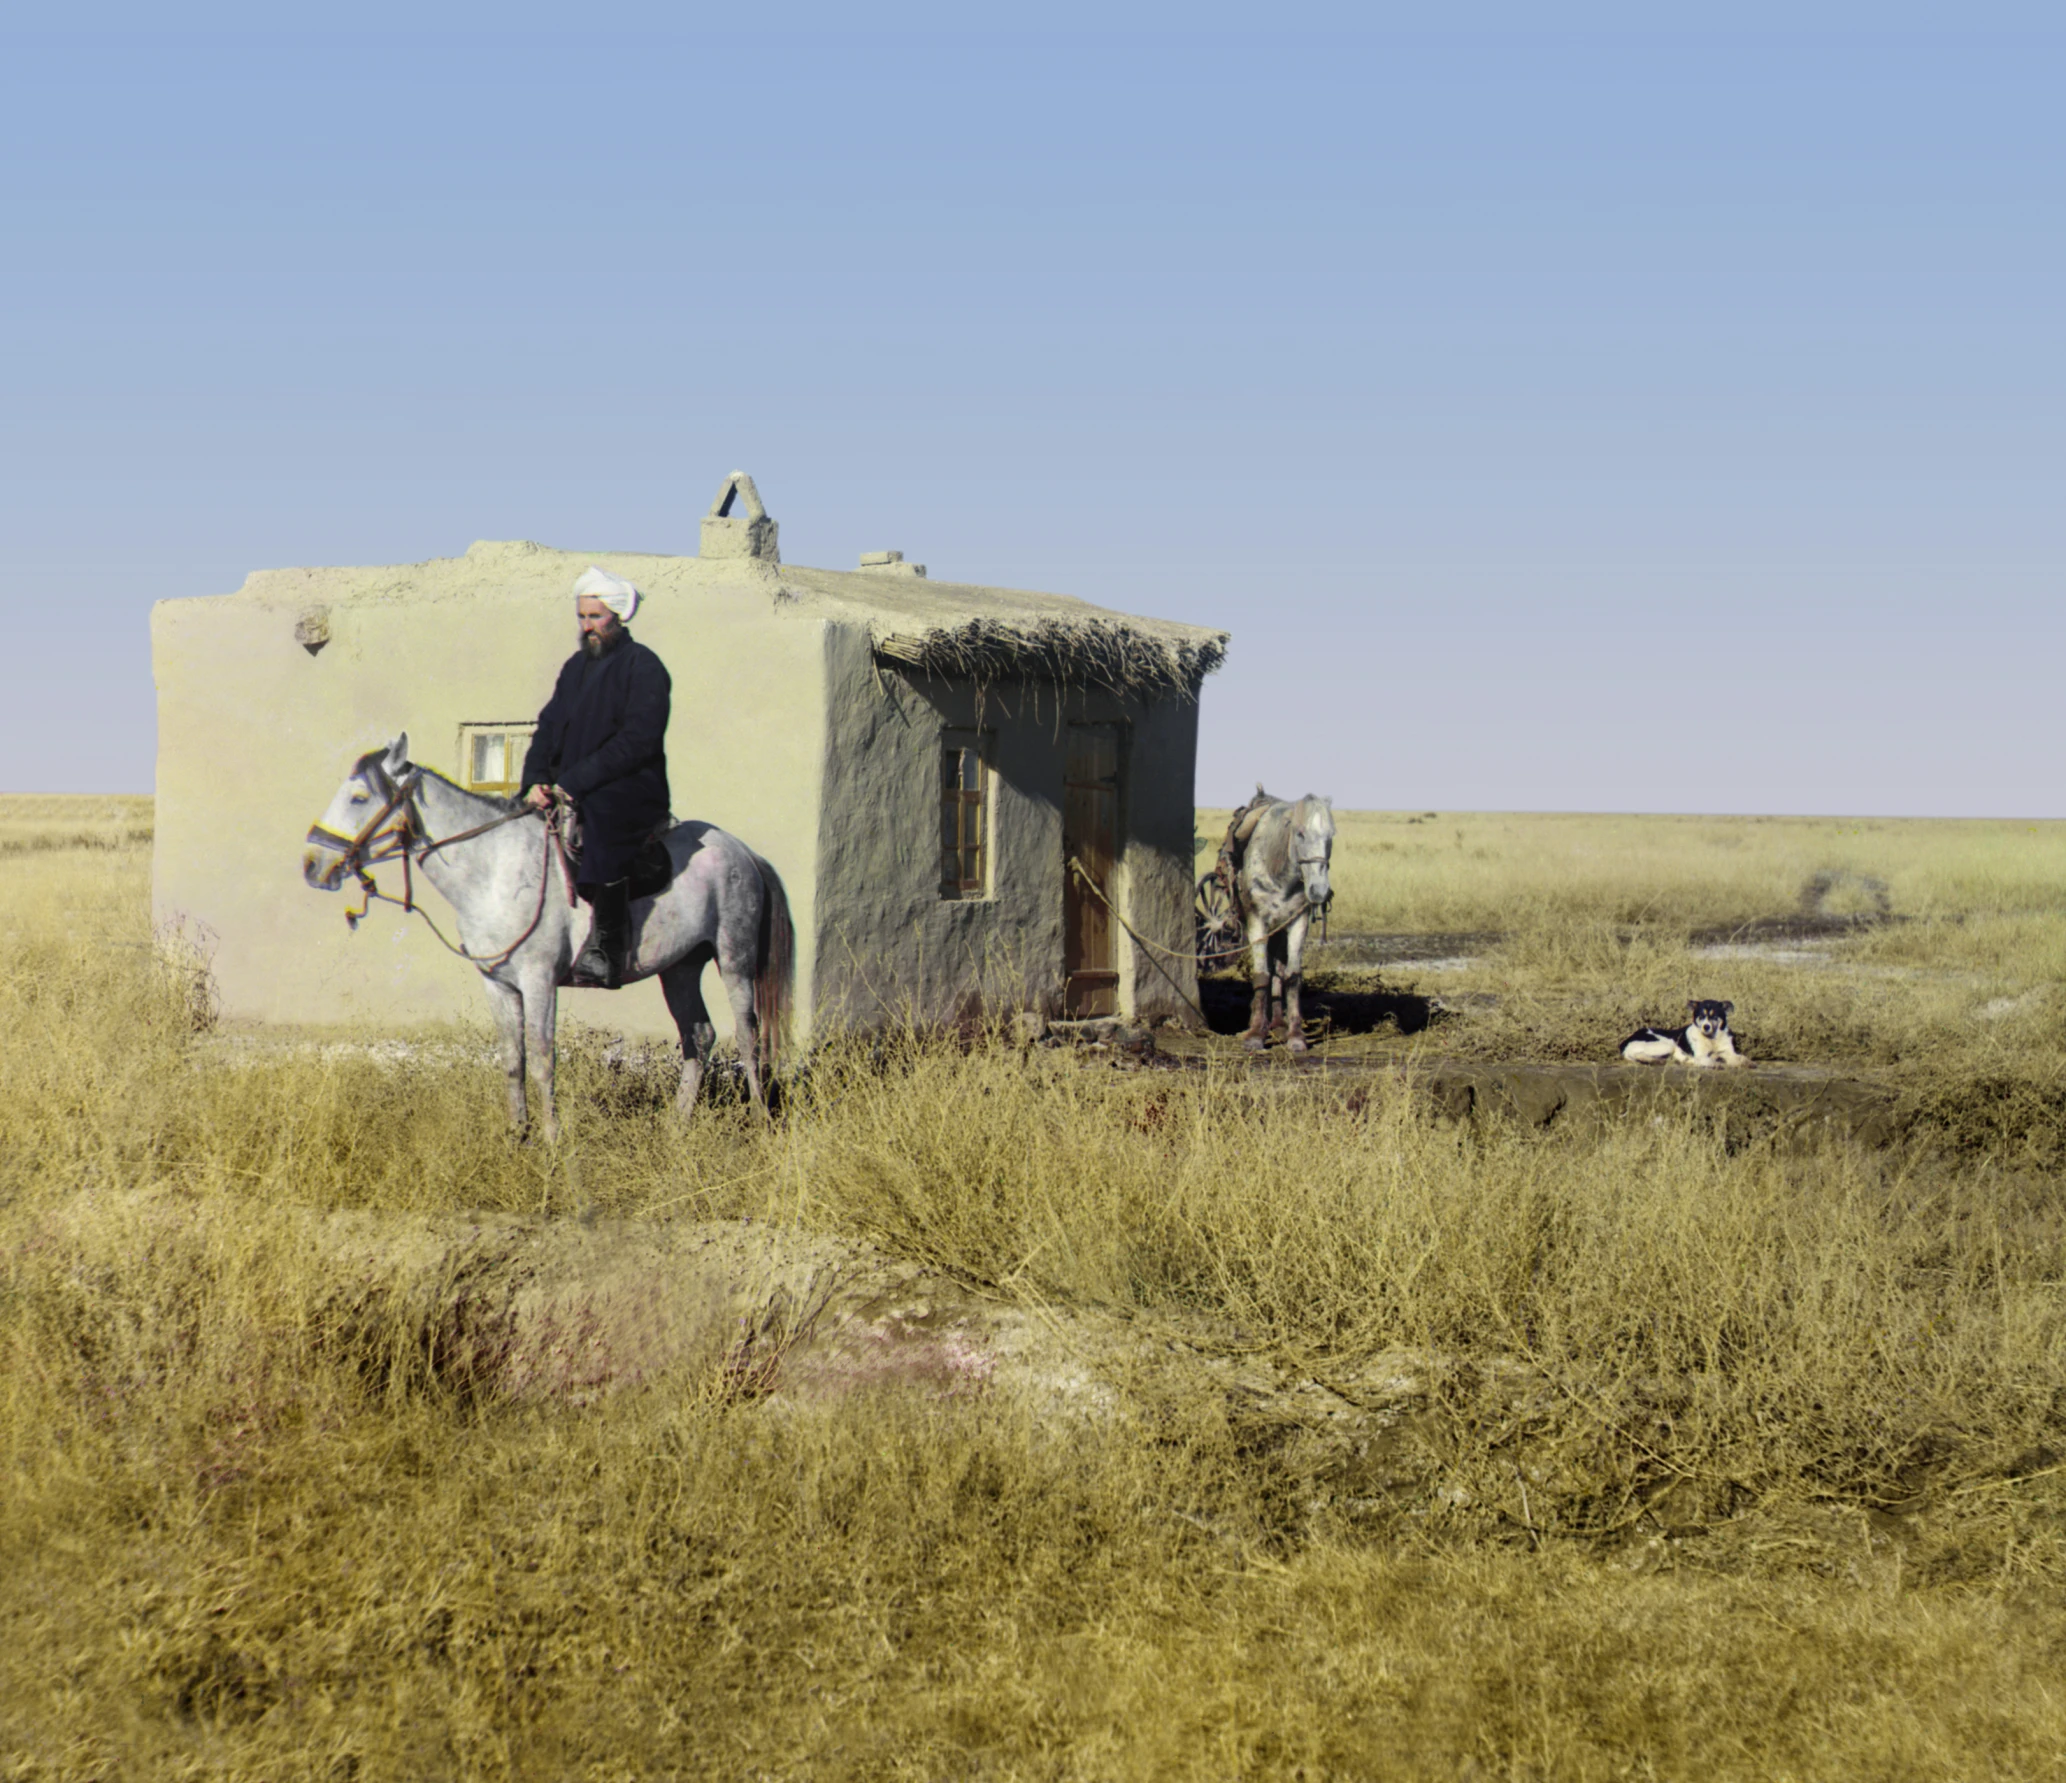 a man on horse next to an old building